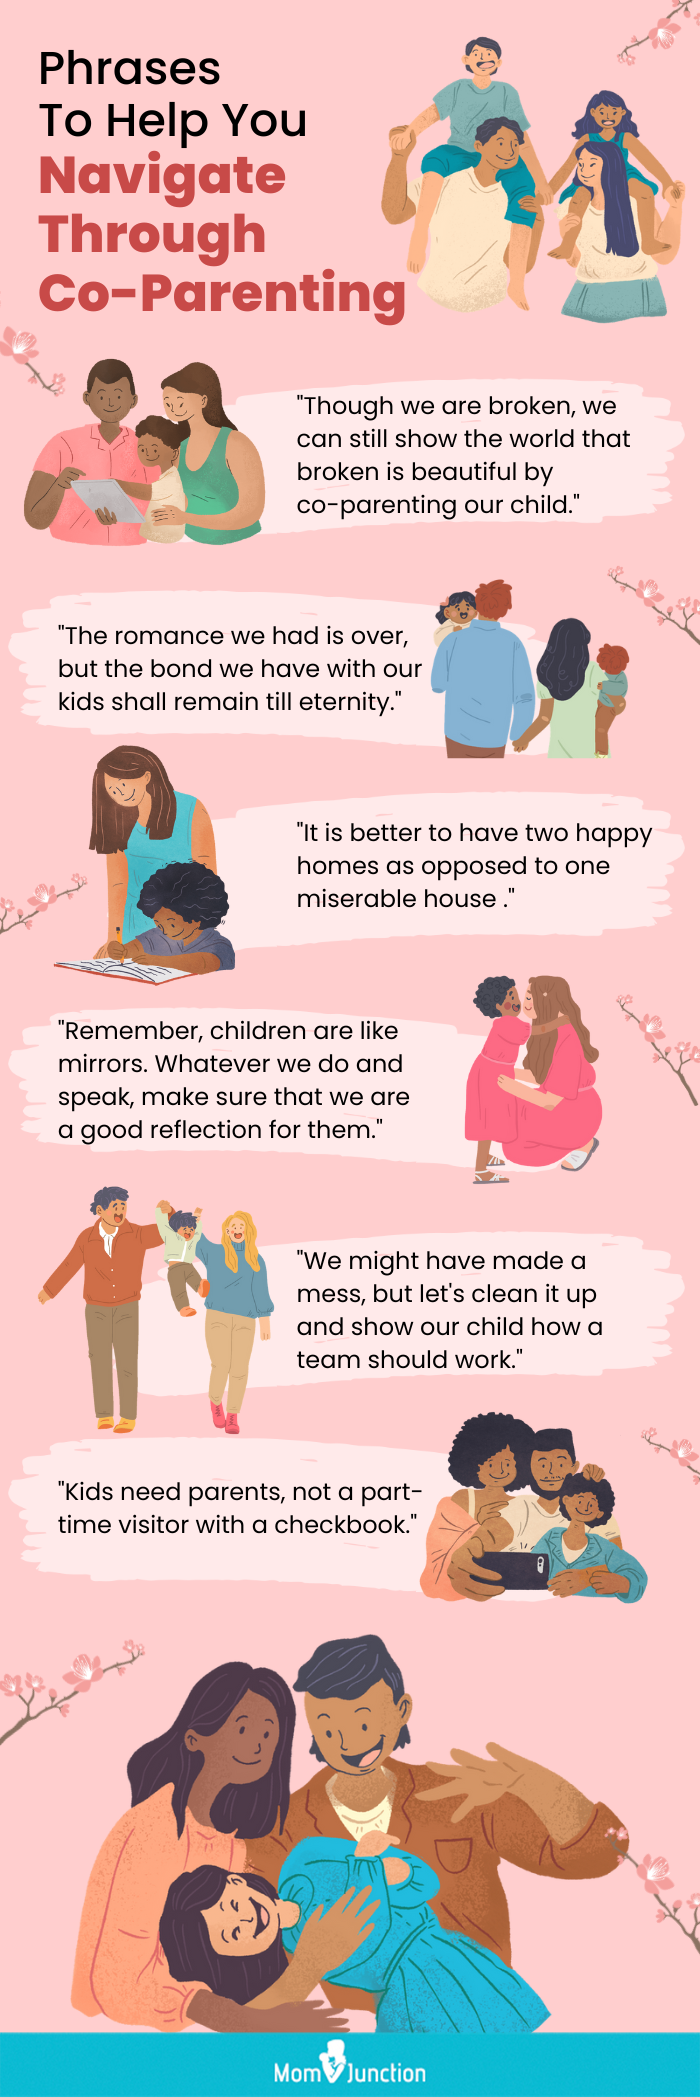 phrases to help you navigate through co-parenting [infographic]